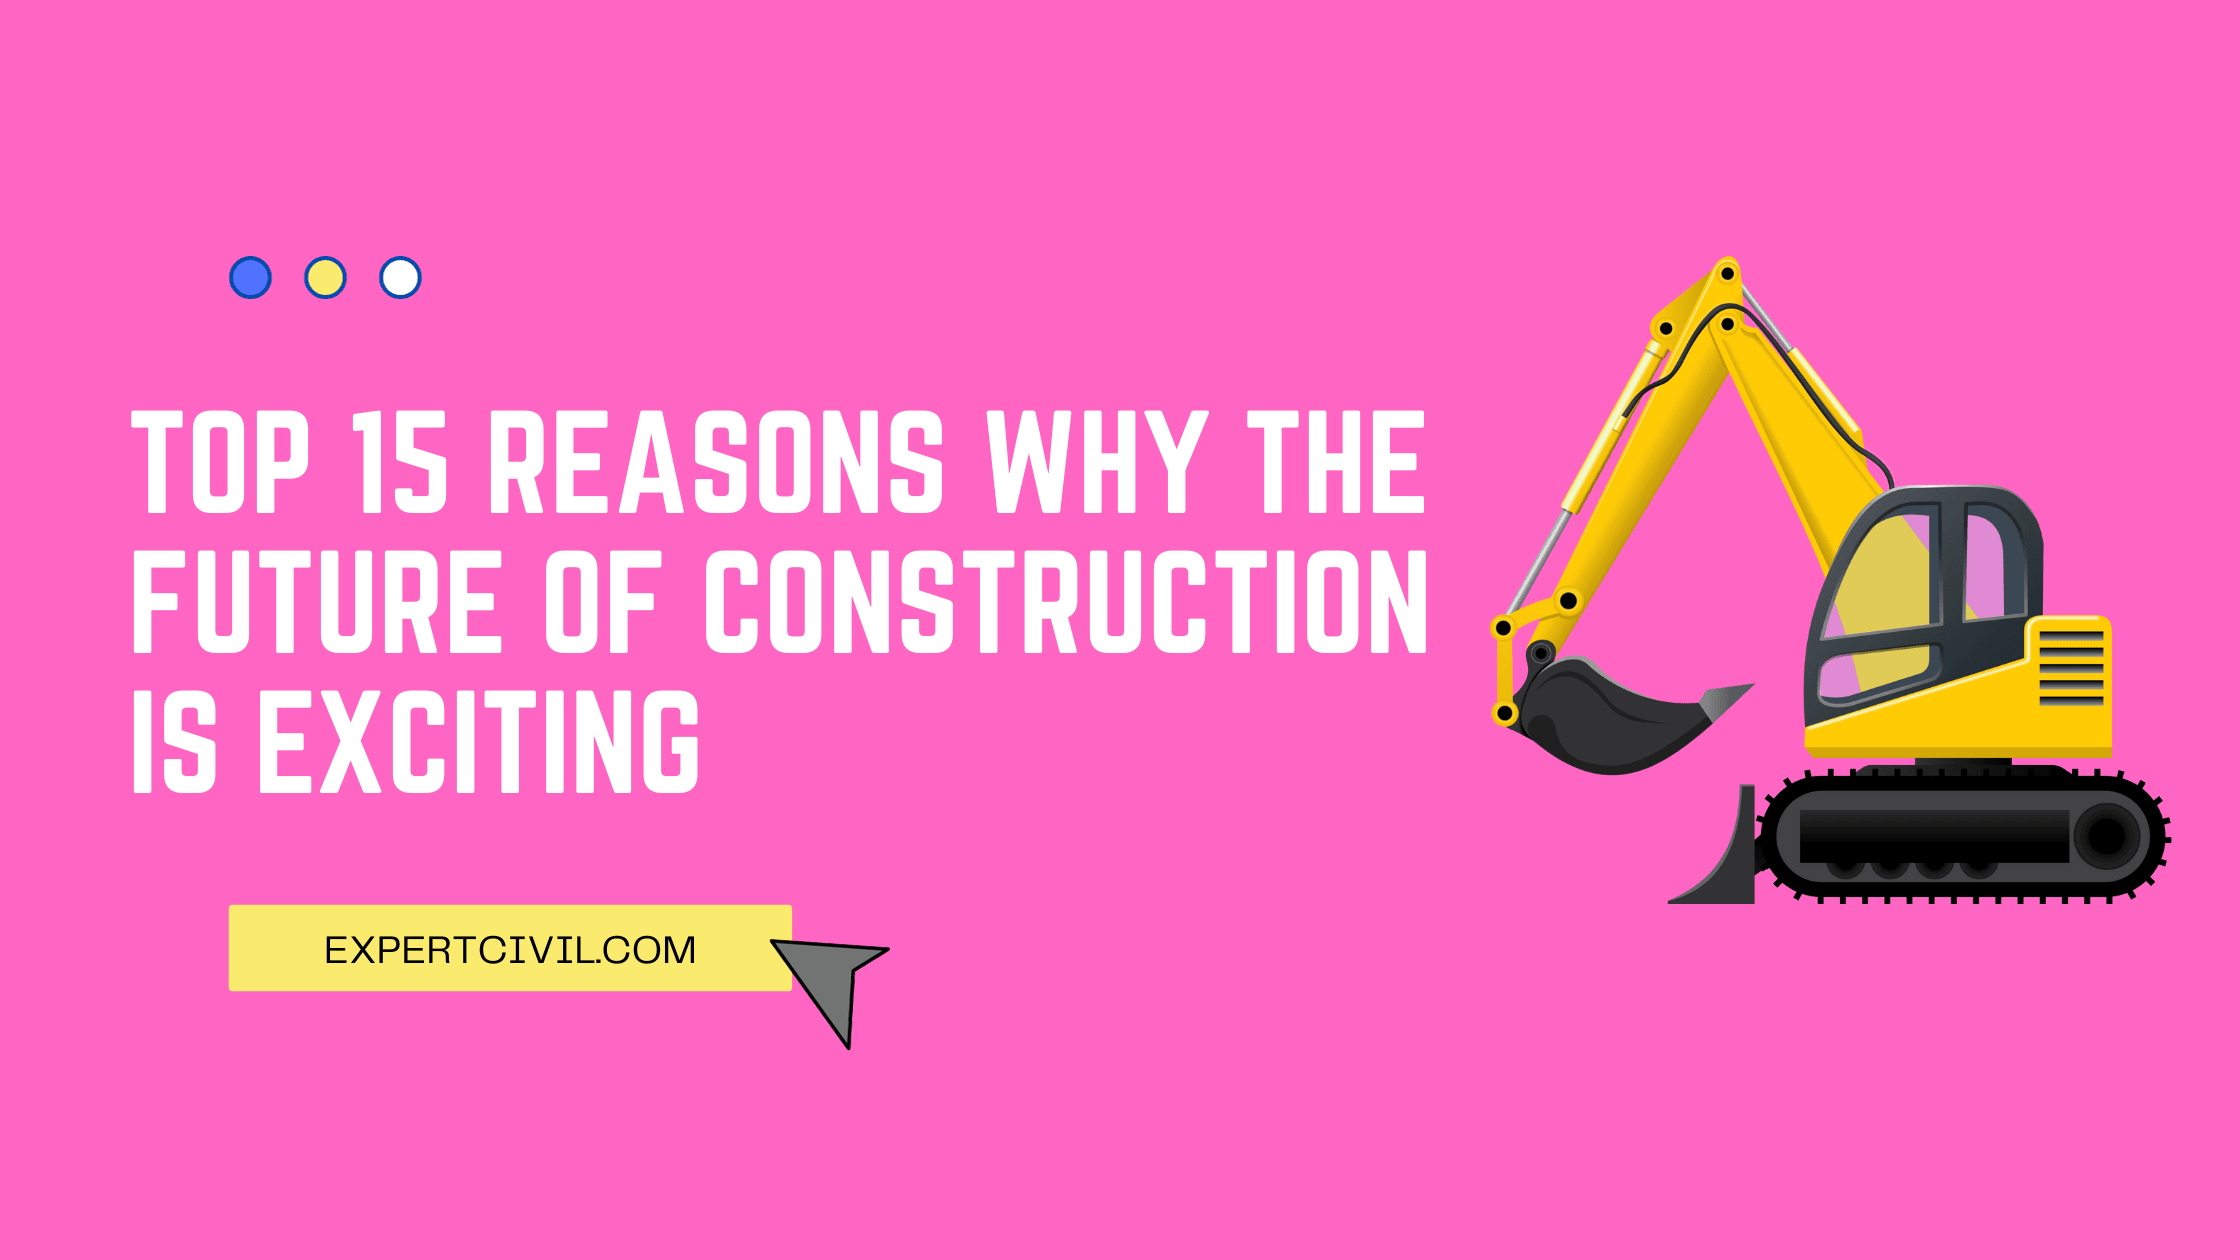 Top 15 Reasons Why The Future of Construction Is Exciting